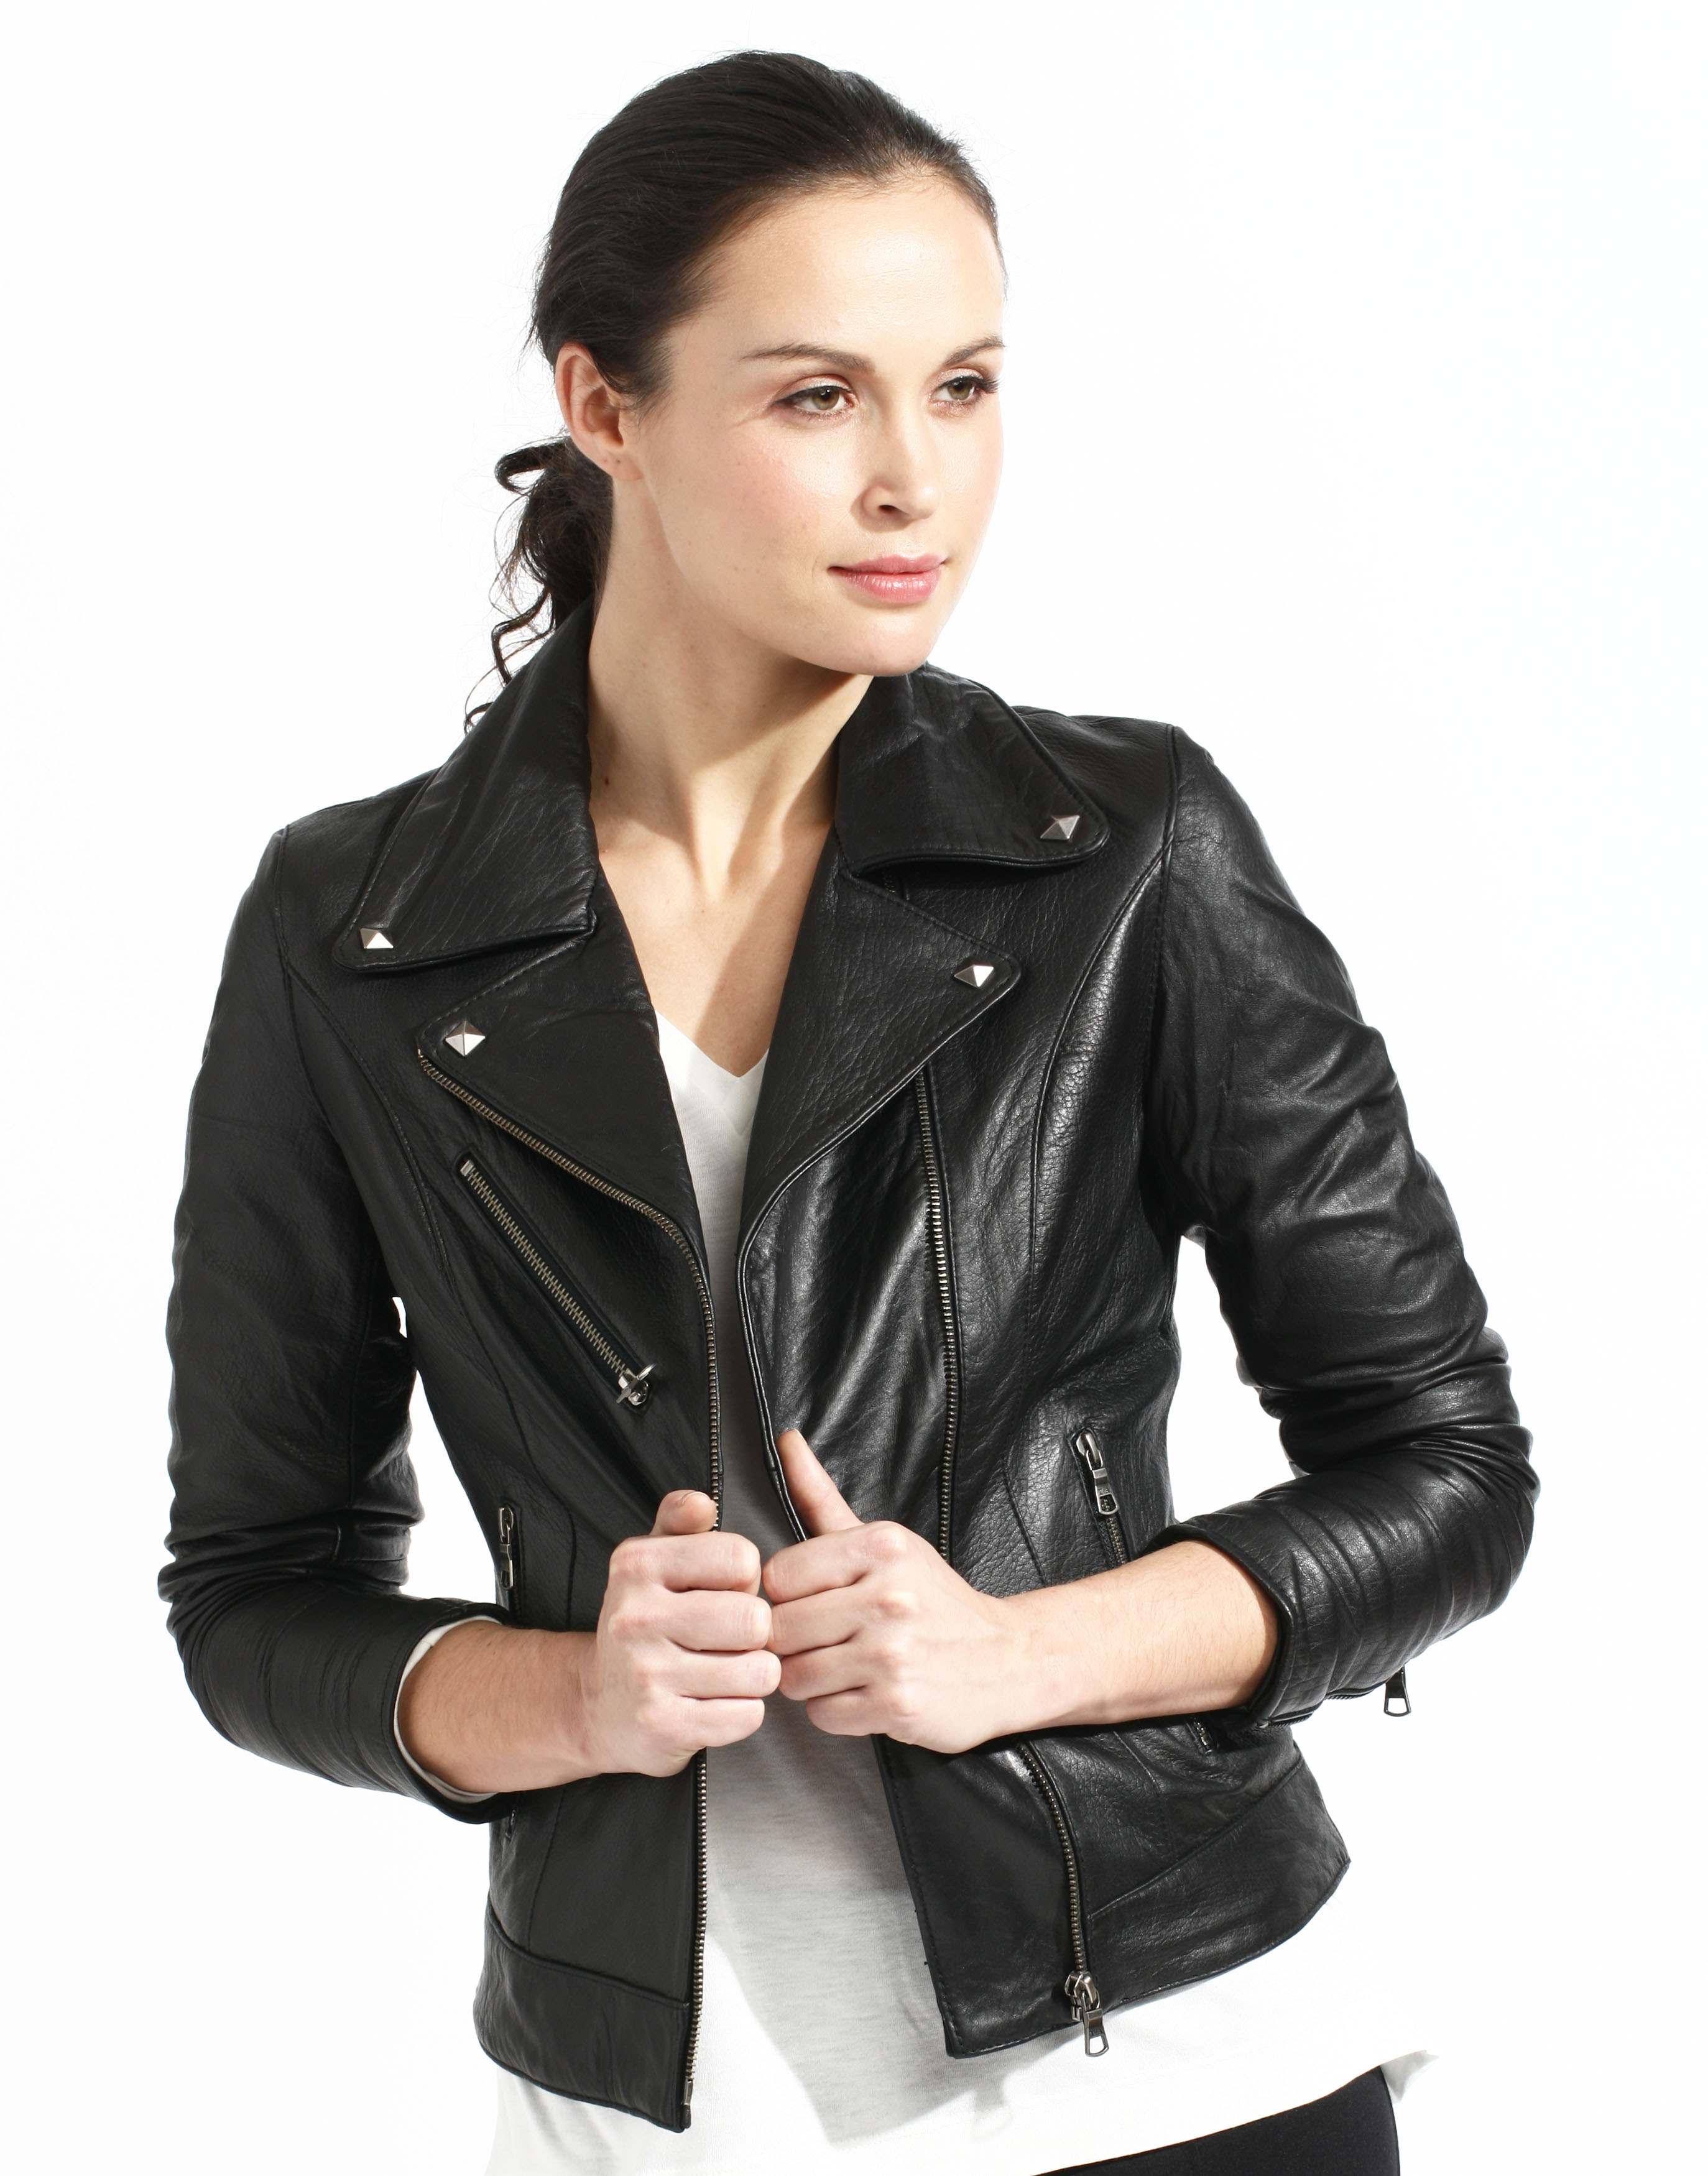 Womens leather jackets for cheap – Modern fashion jacket photo blog